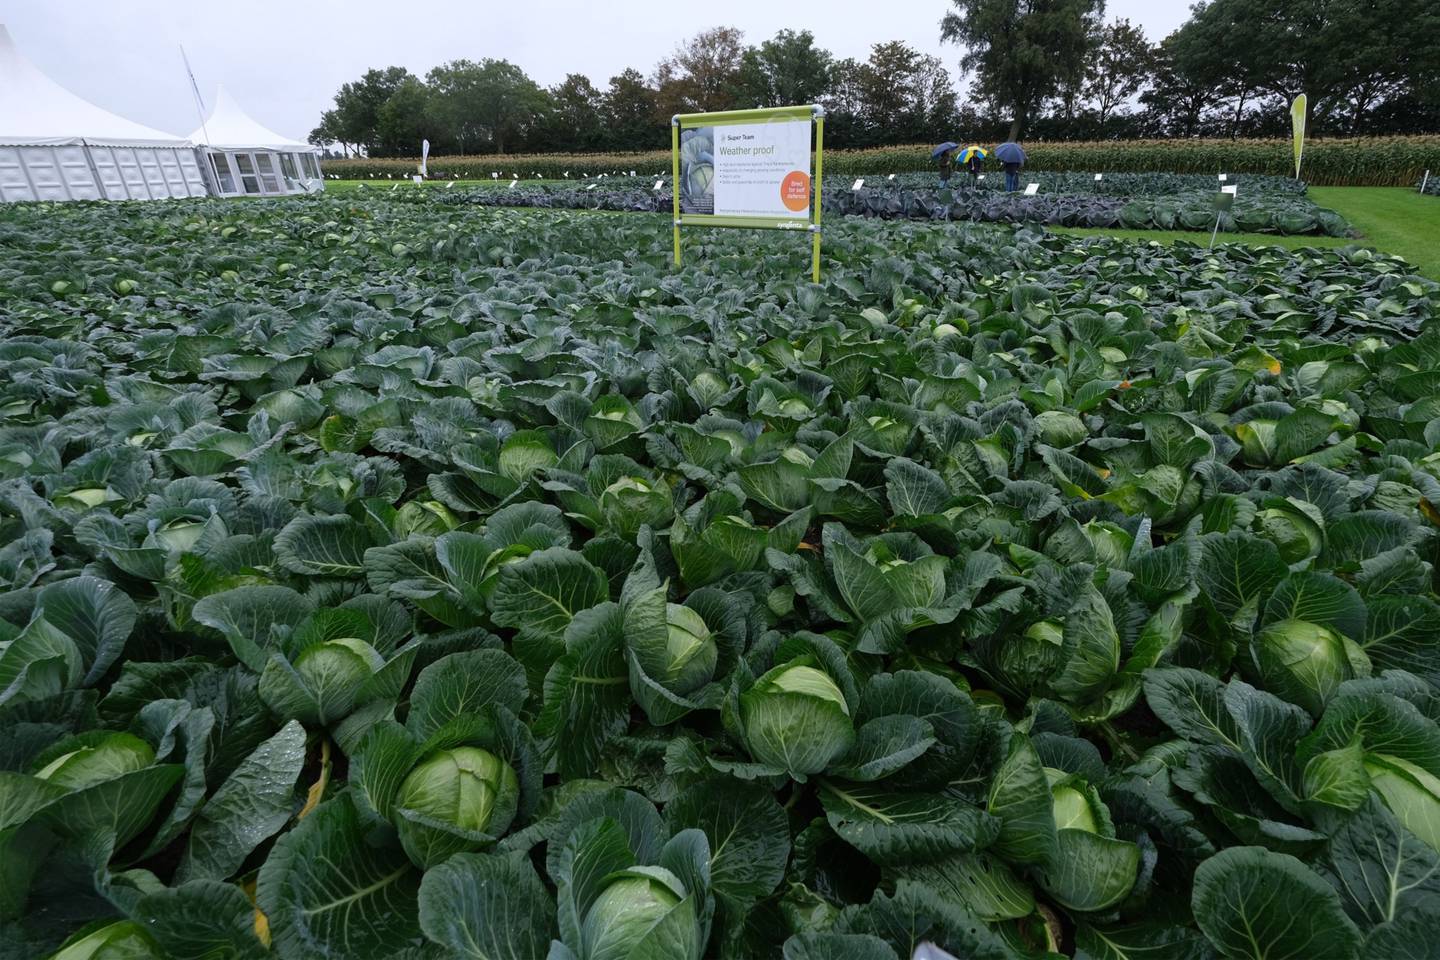 Syngenta AG's white cabbages, bred for insect resistance and adaptability to changing conditions such as drought and heat, at the company's Fields of Innovation, in Grootebroek, the Netherlands. Photographer: Yuriko Nakao/Bloombergdfd